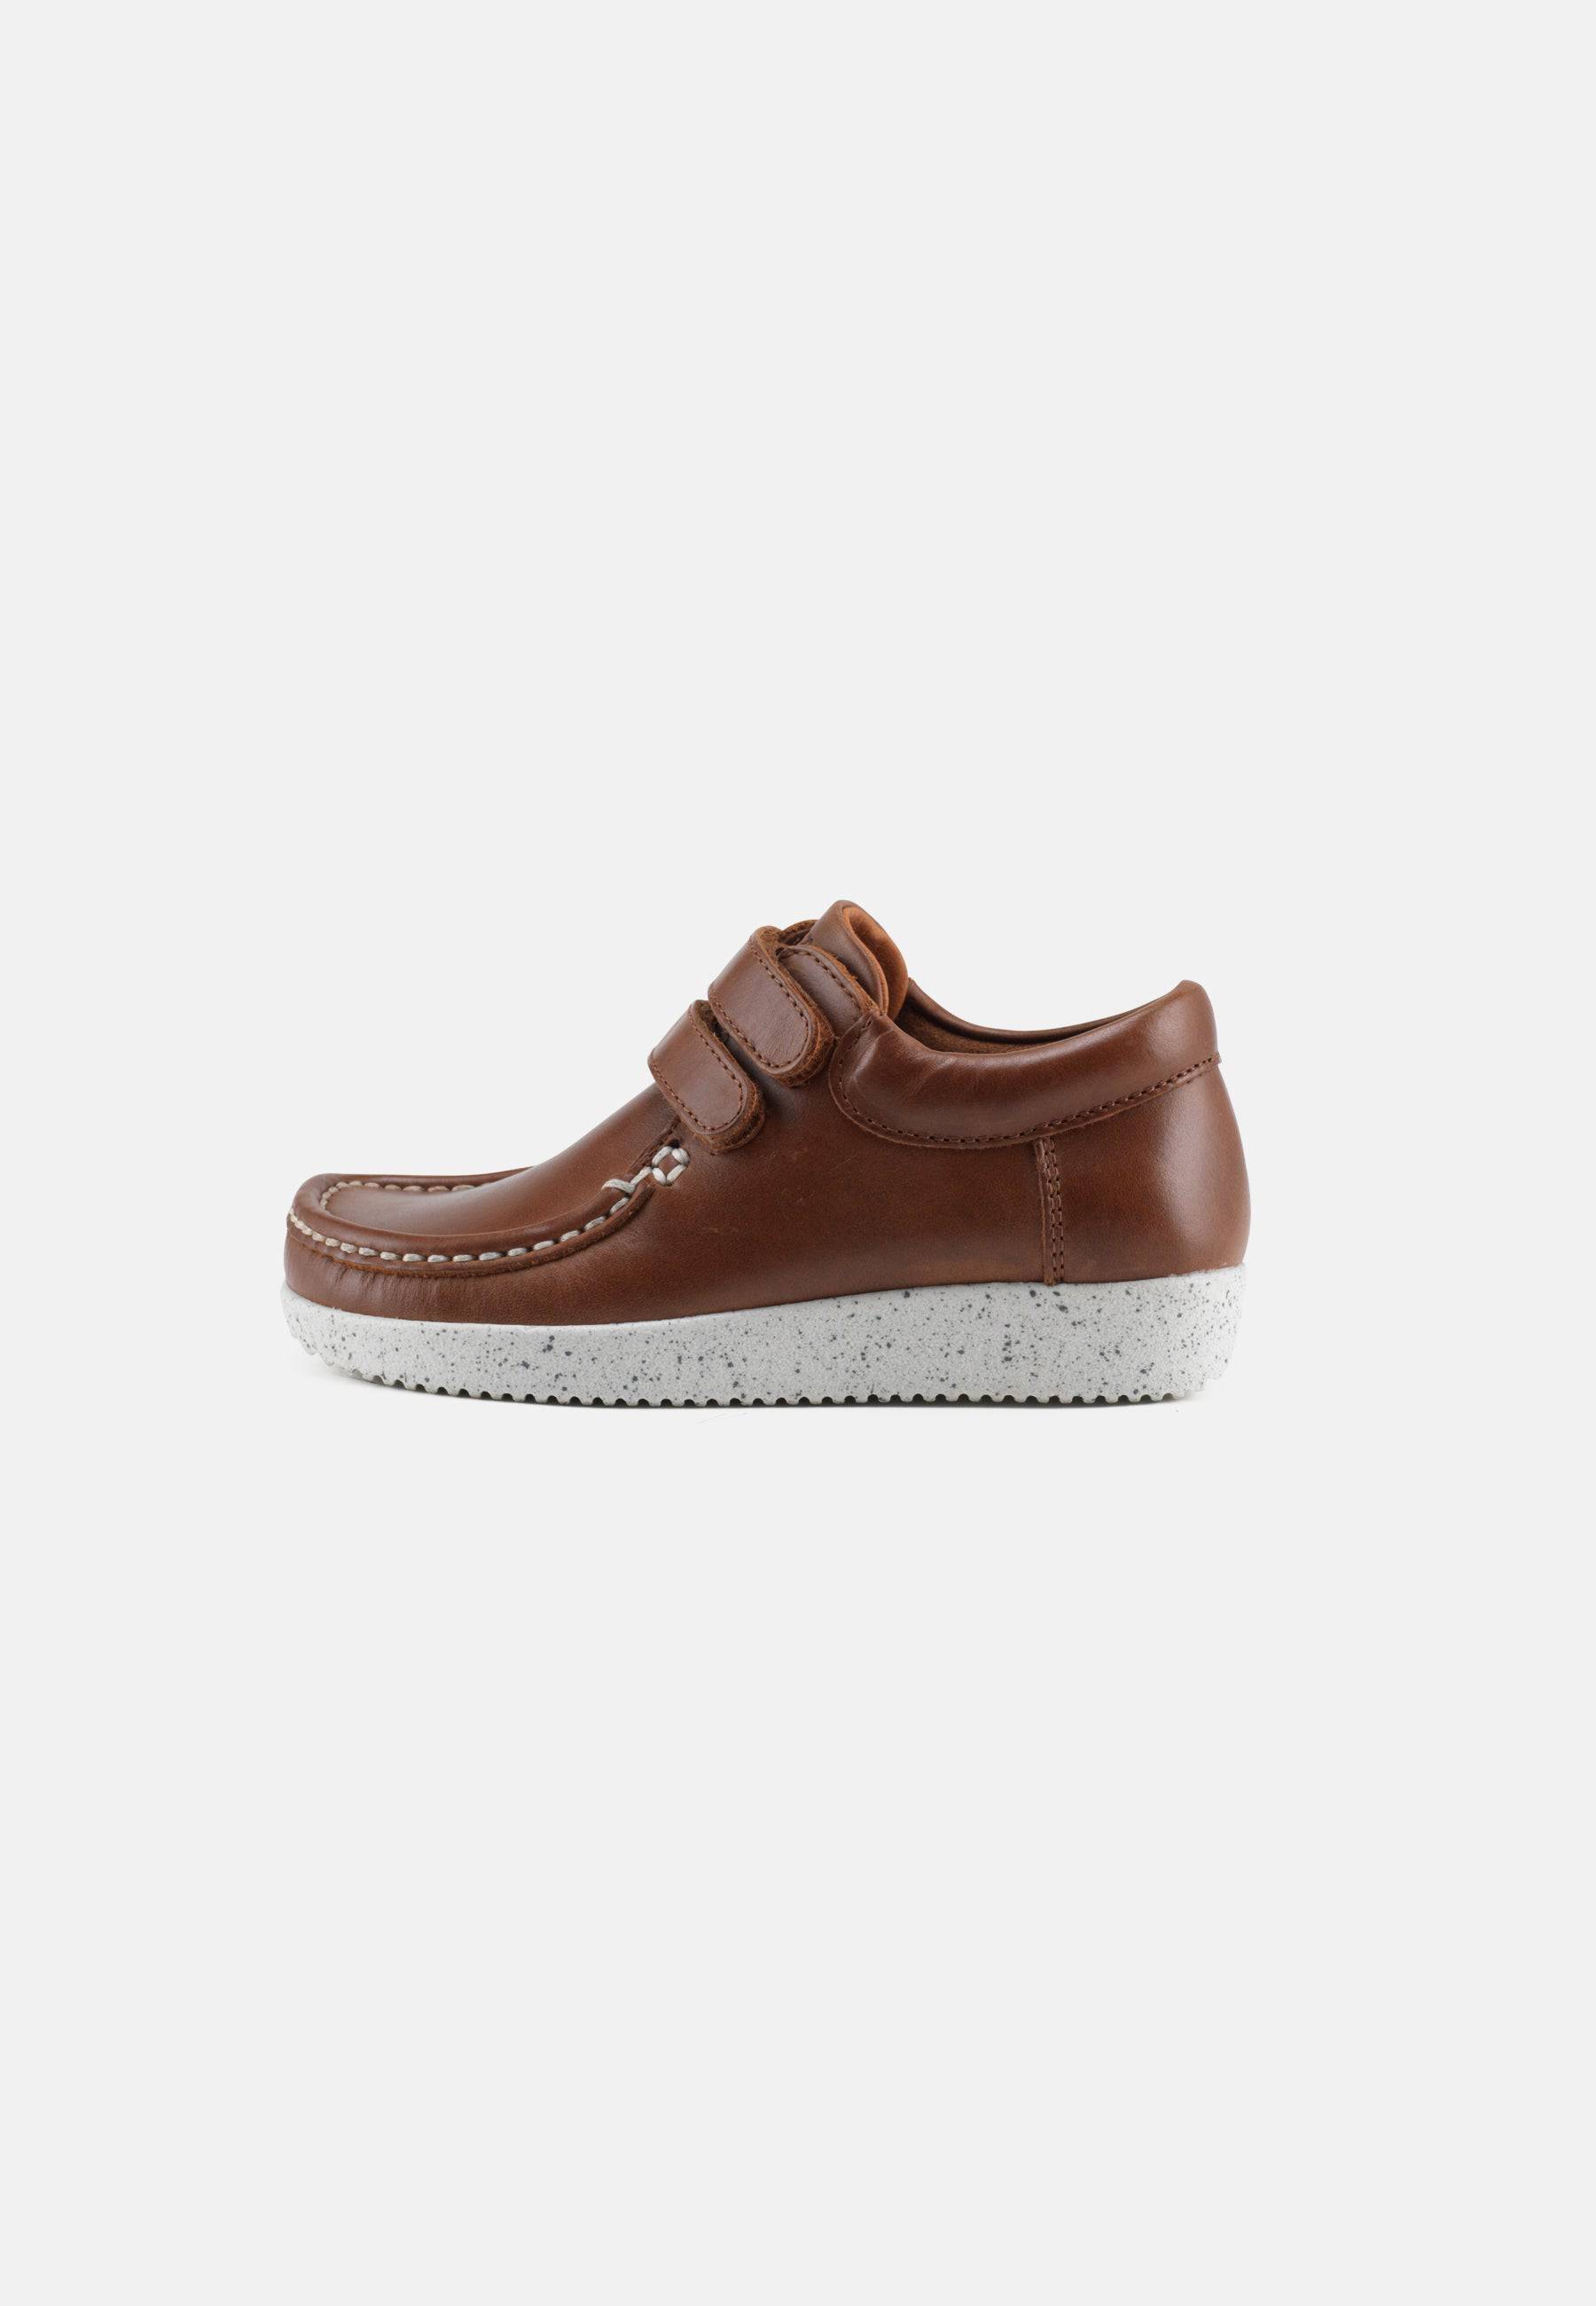 Ash Children's Shoes Leather - Tobacco